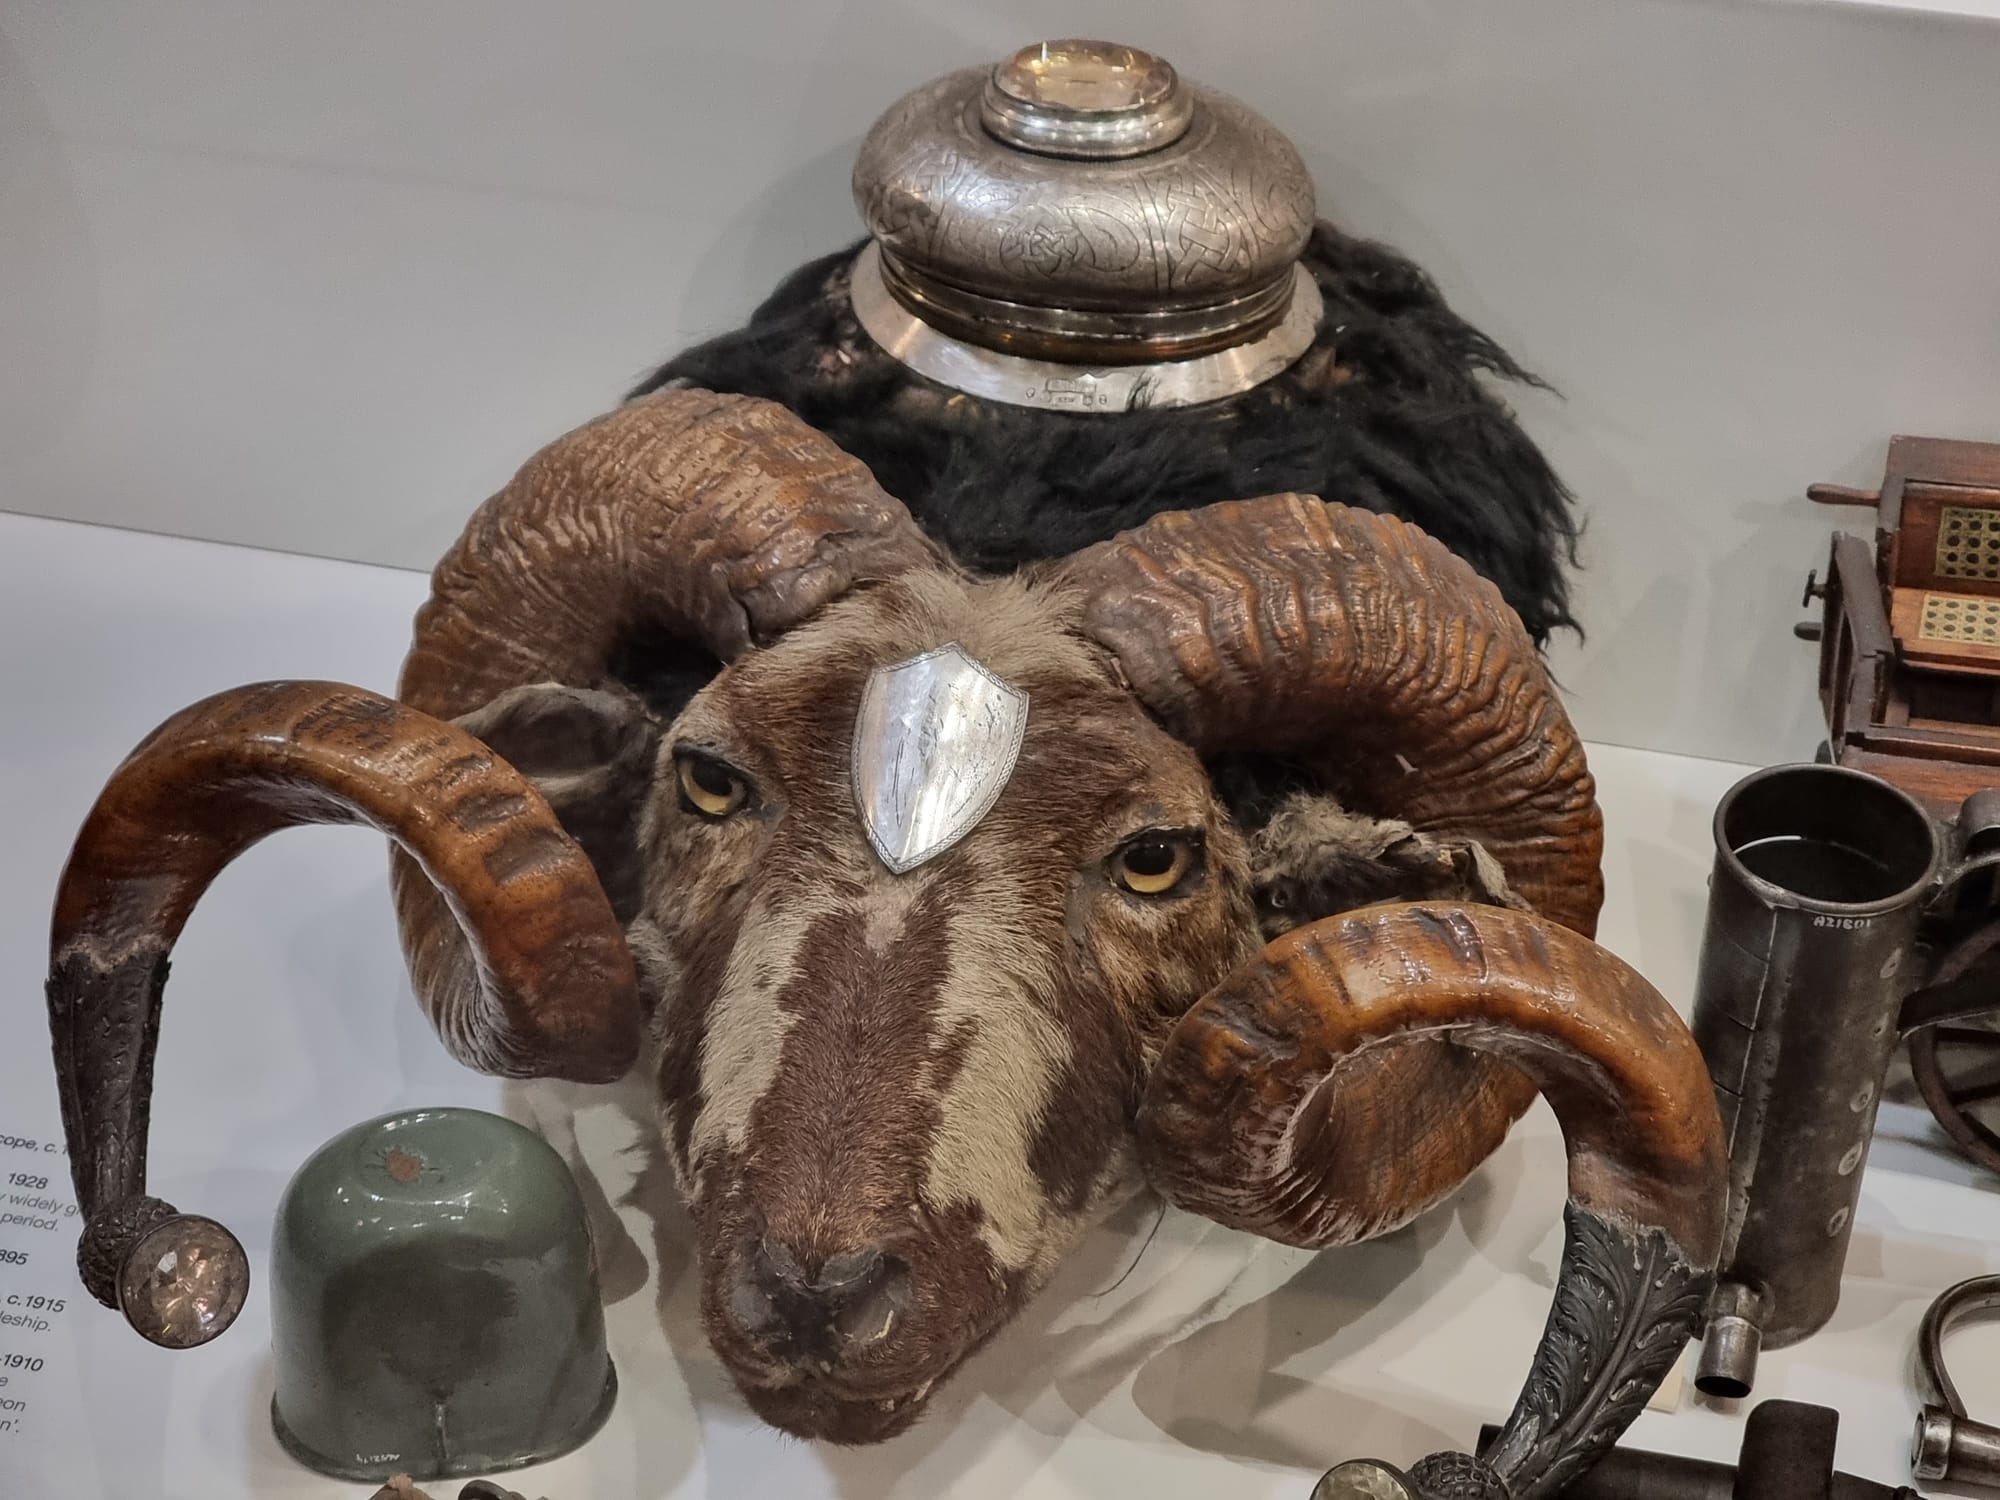 A ram's head with a metal snuff box on top.